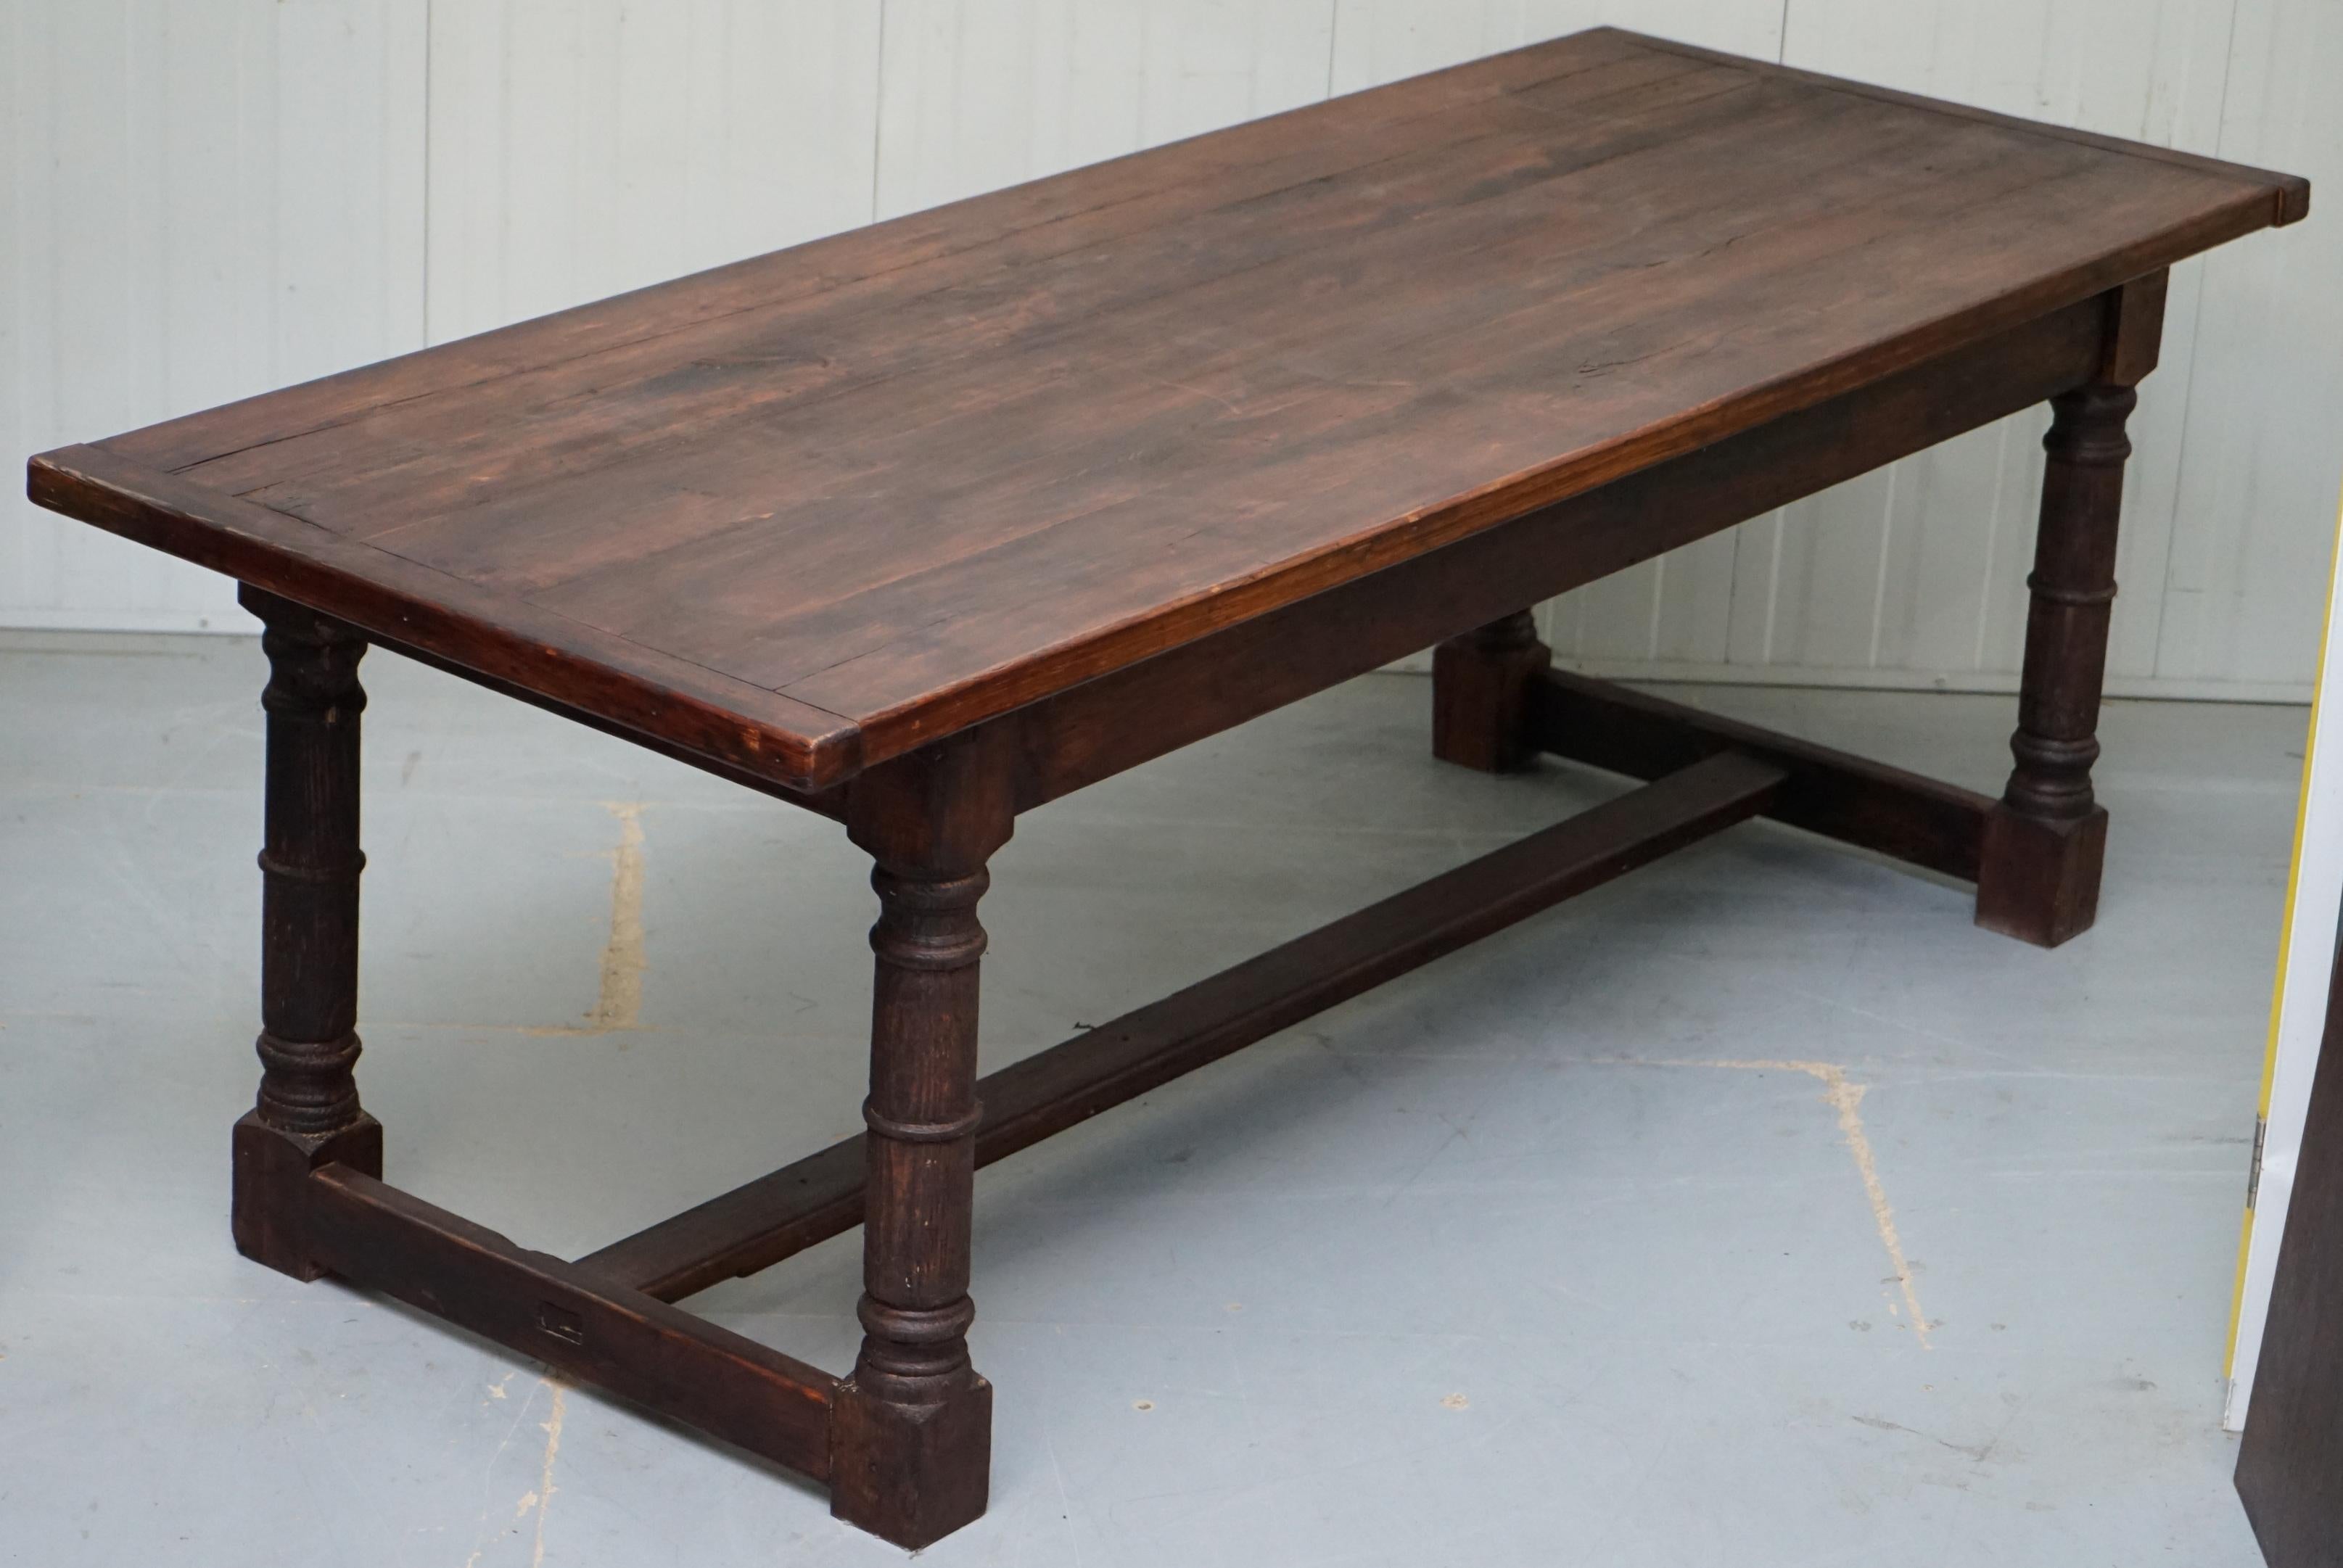 We are delighted to offer this lovely original solid oak English farmhouse country refectory dining table that seats 8-10 people

A very good looking well made and versatile oak dining table, hand made in England using traditional furniture